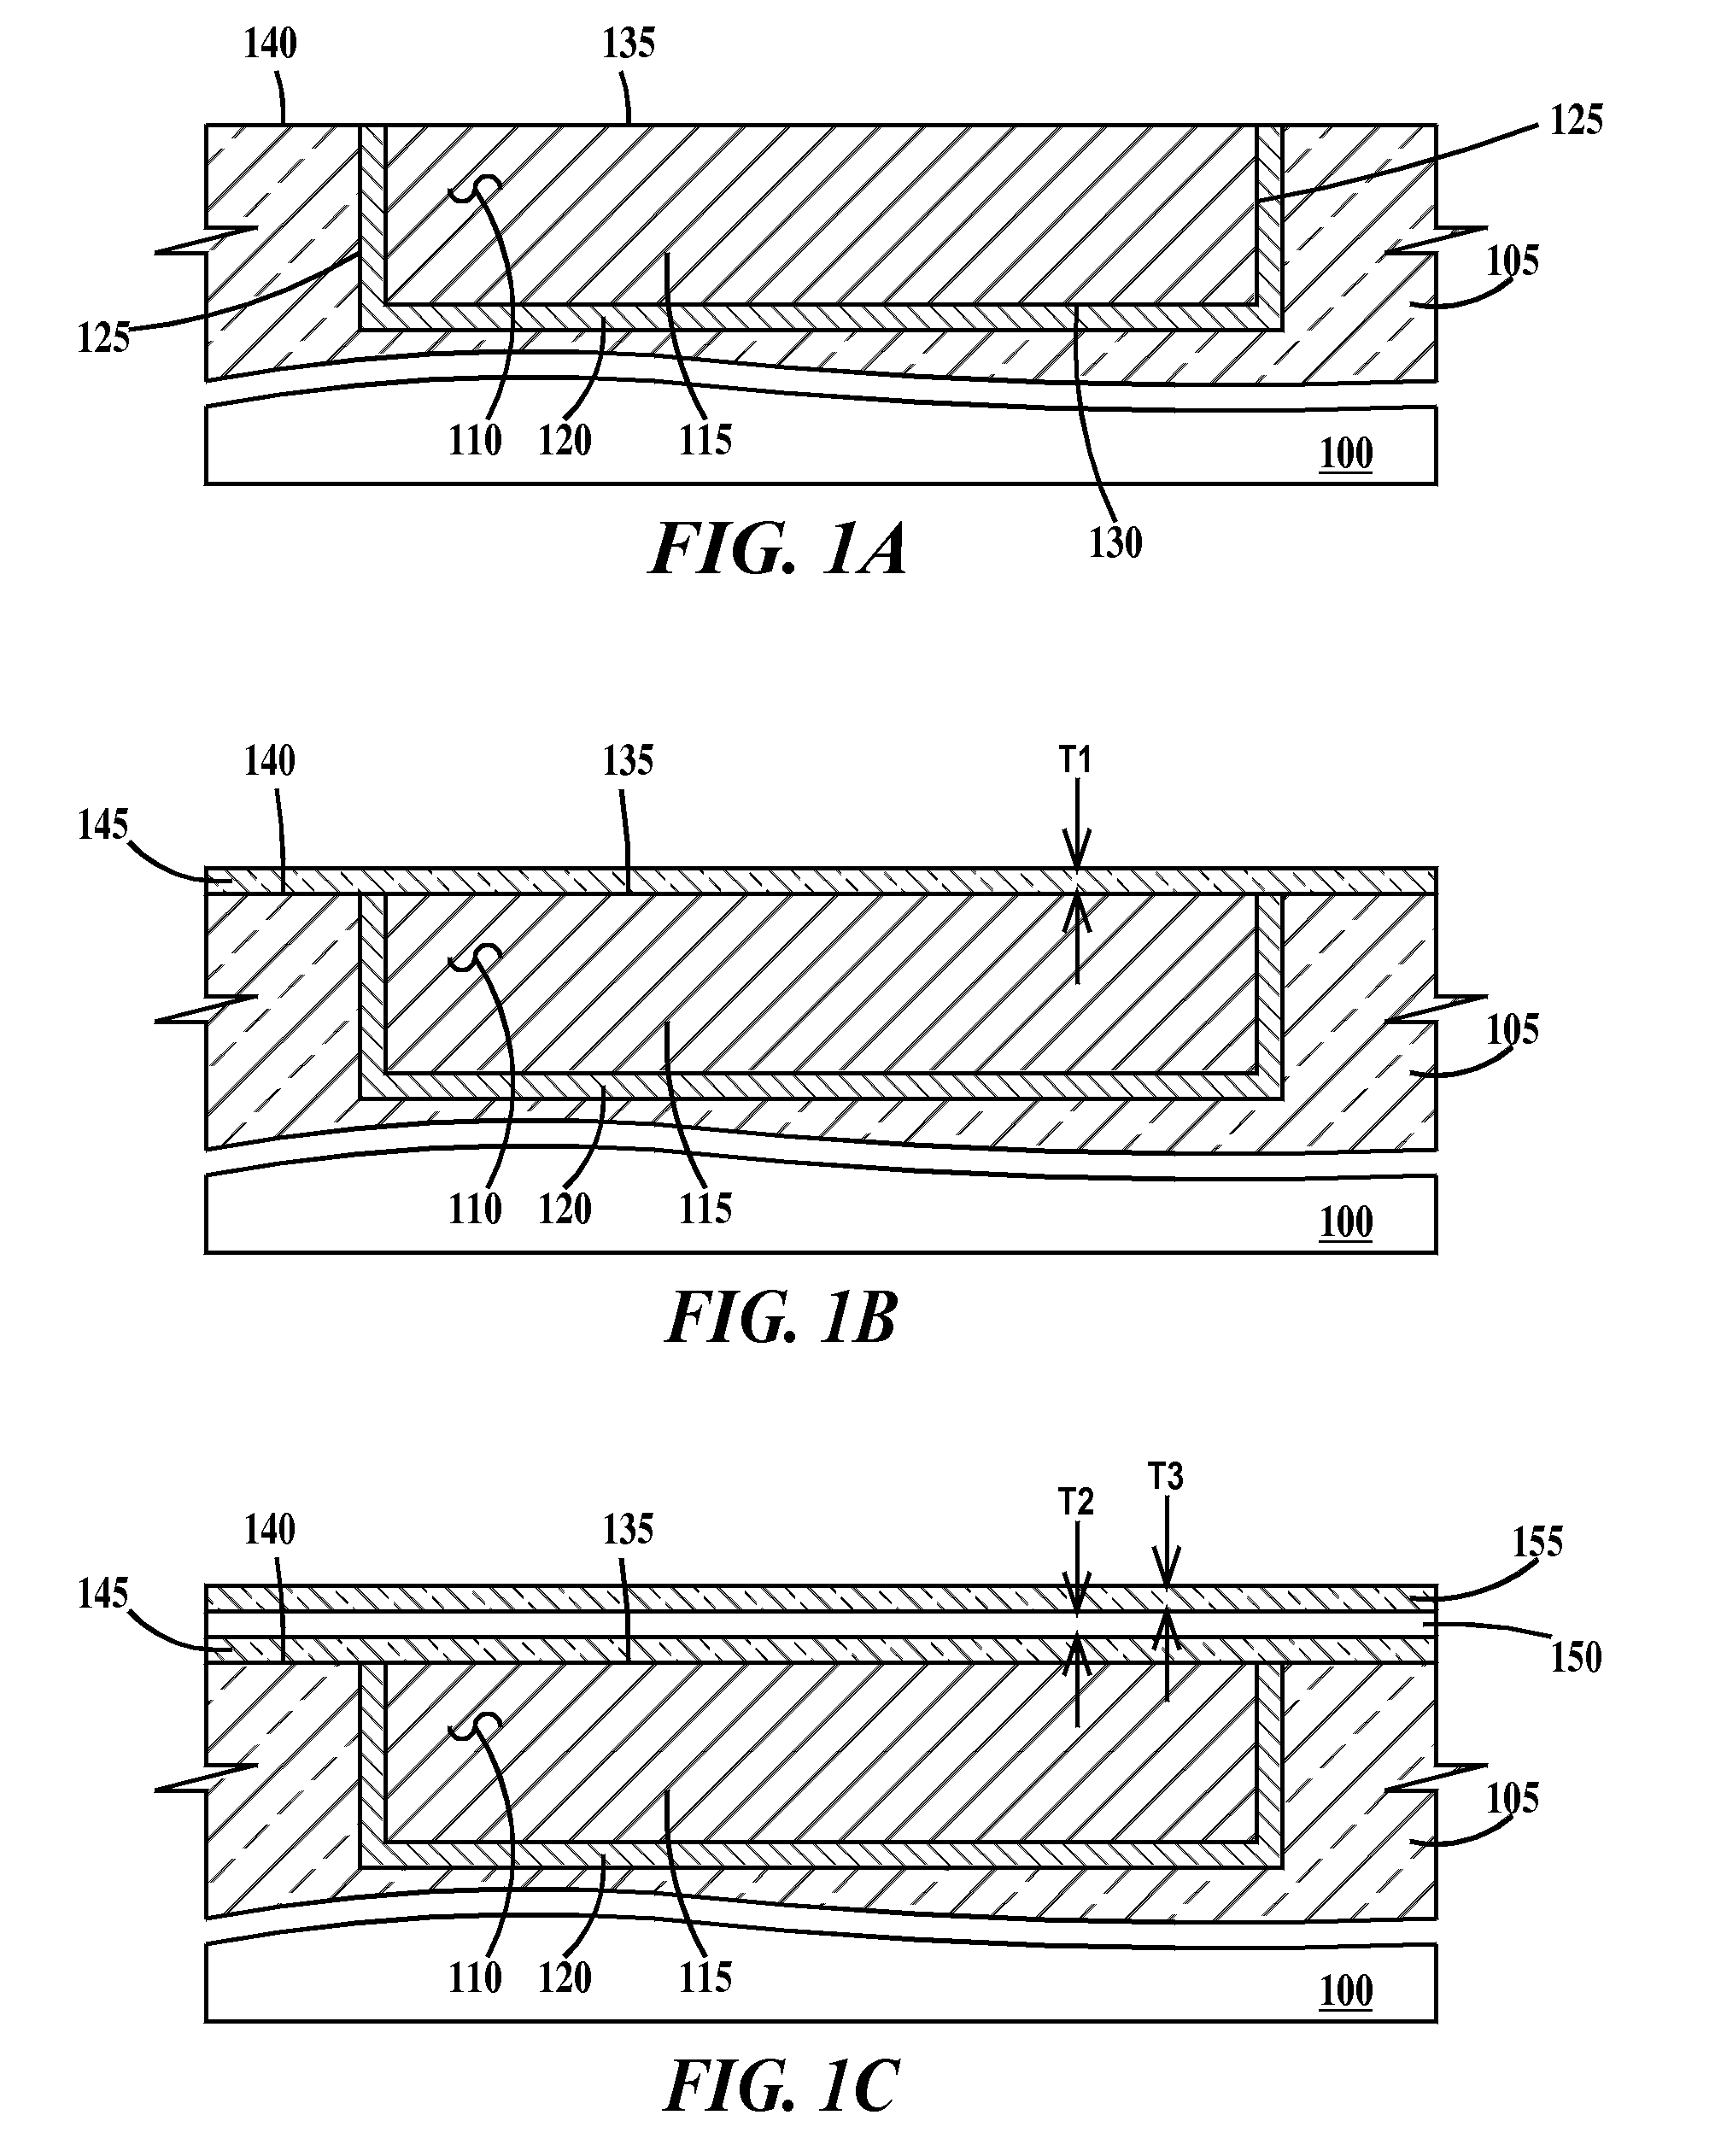 Method of forming a metal silicide layer, devices incorporating metal silicide layers and design structures for the devices